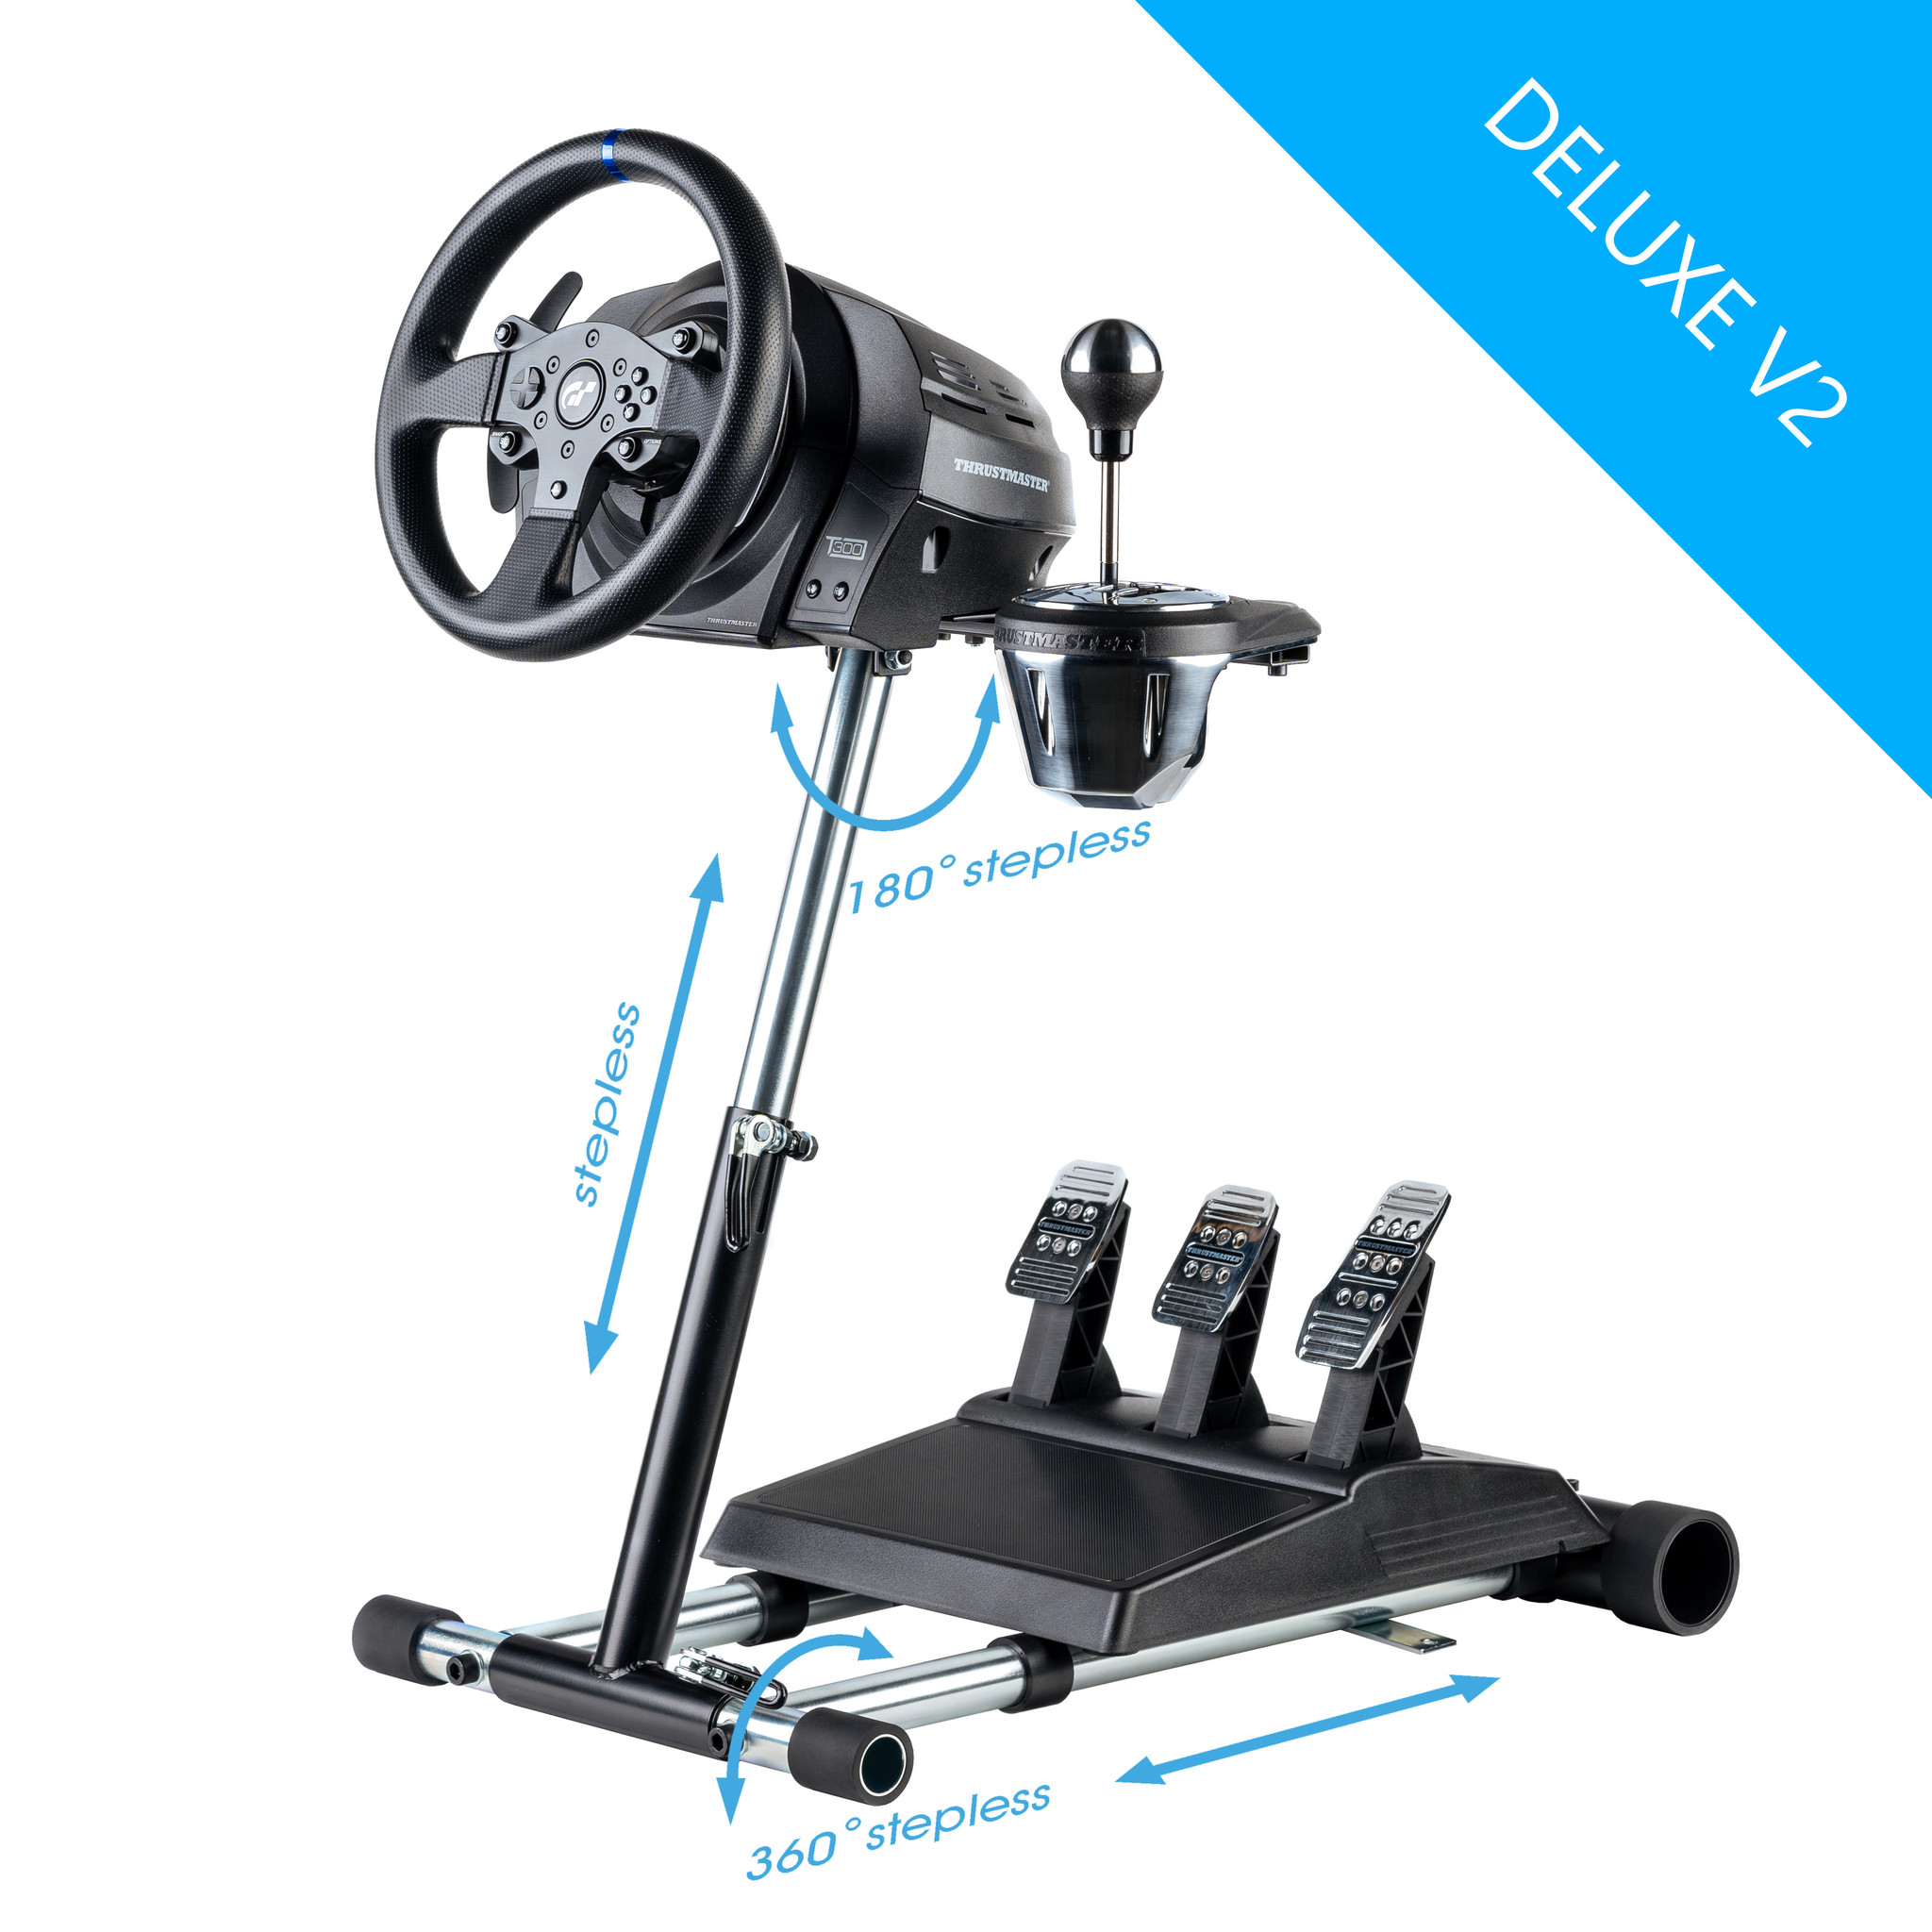 WheelStandPro Stand for Thrustmaster |Ships same day Dallas Texas